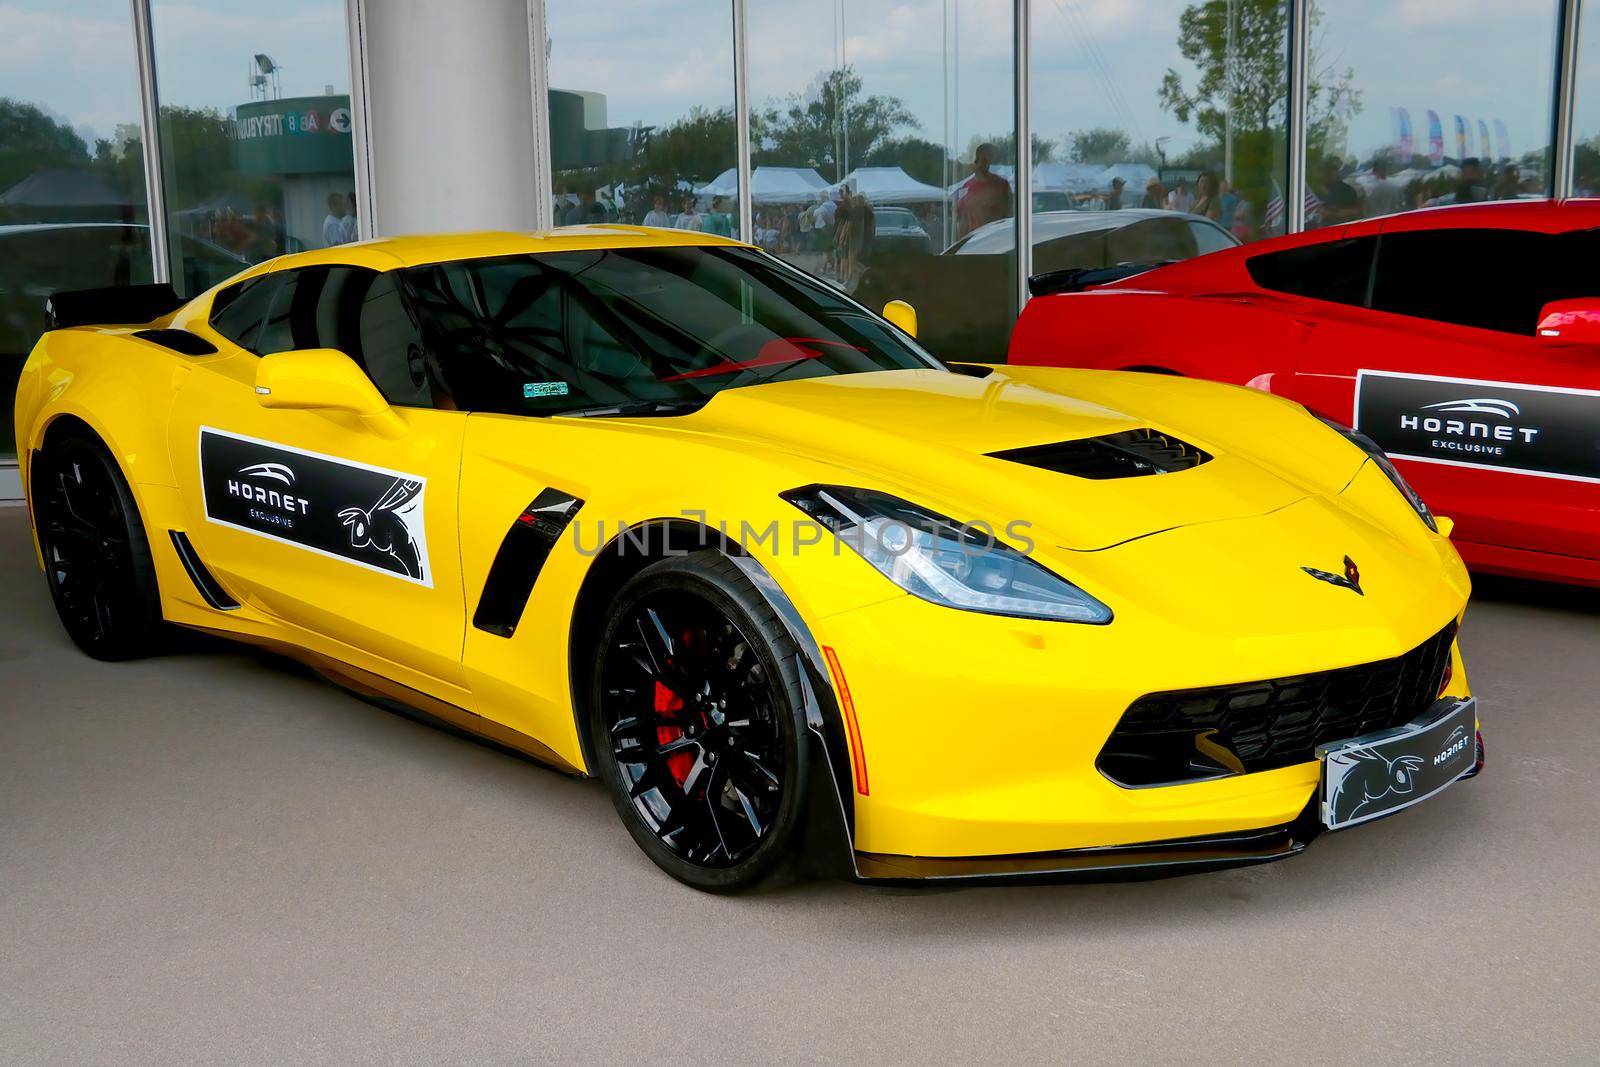 Wroclaw, Poland, August 22, 2021: beautiful yellow sports car Chevrolet Corvette. A two-wheel drive sports car manufactured under the Chevrolet brand by General Motors in the United States